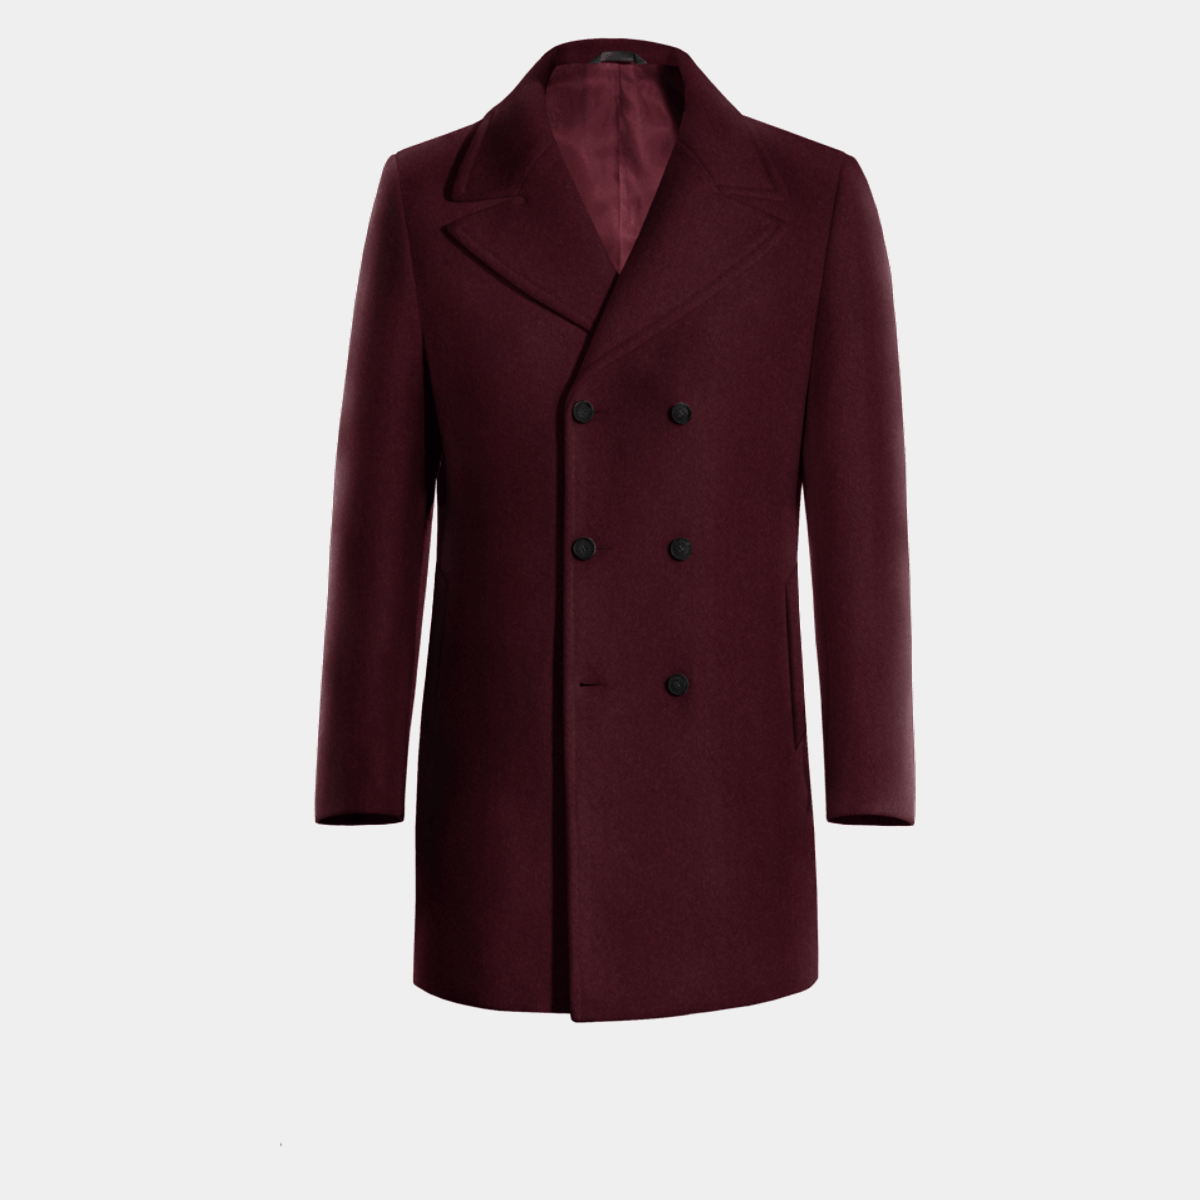 Red Double Breasted Coat $249 | Hockerty